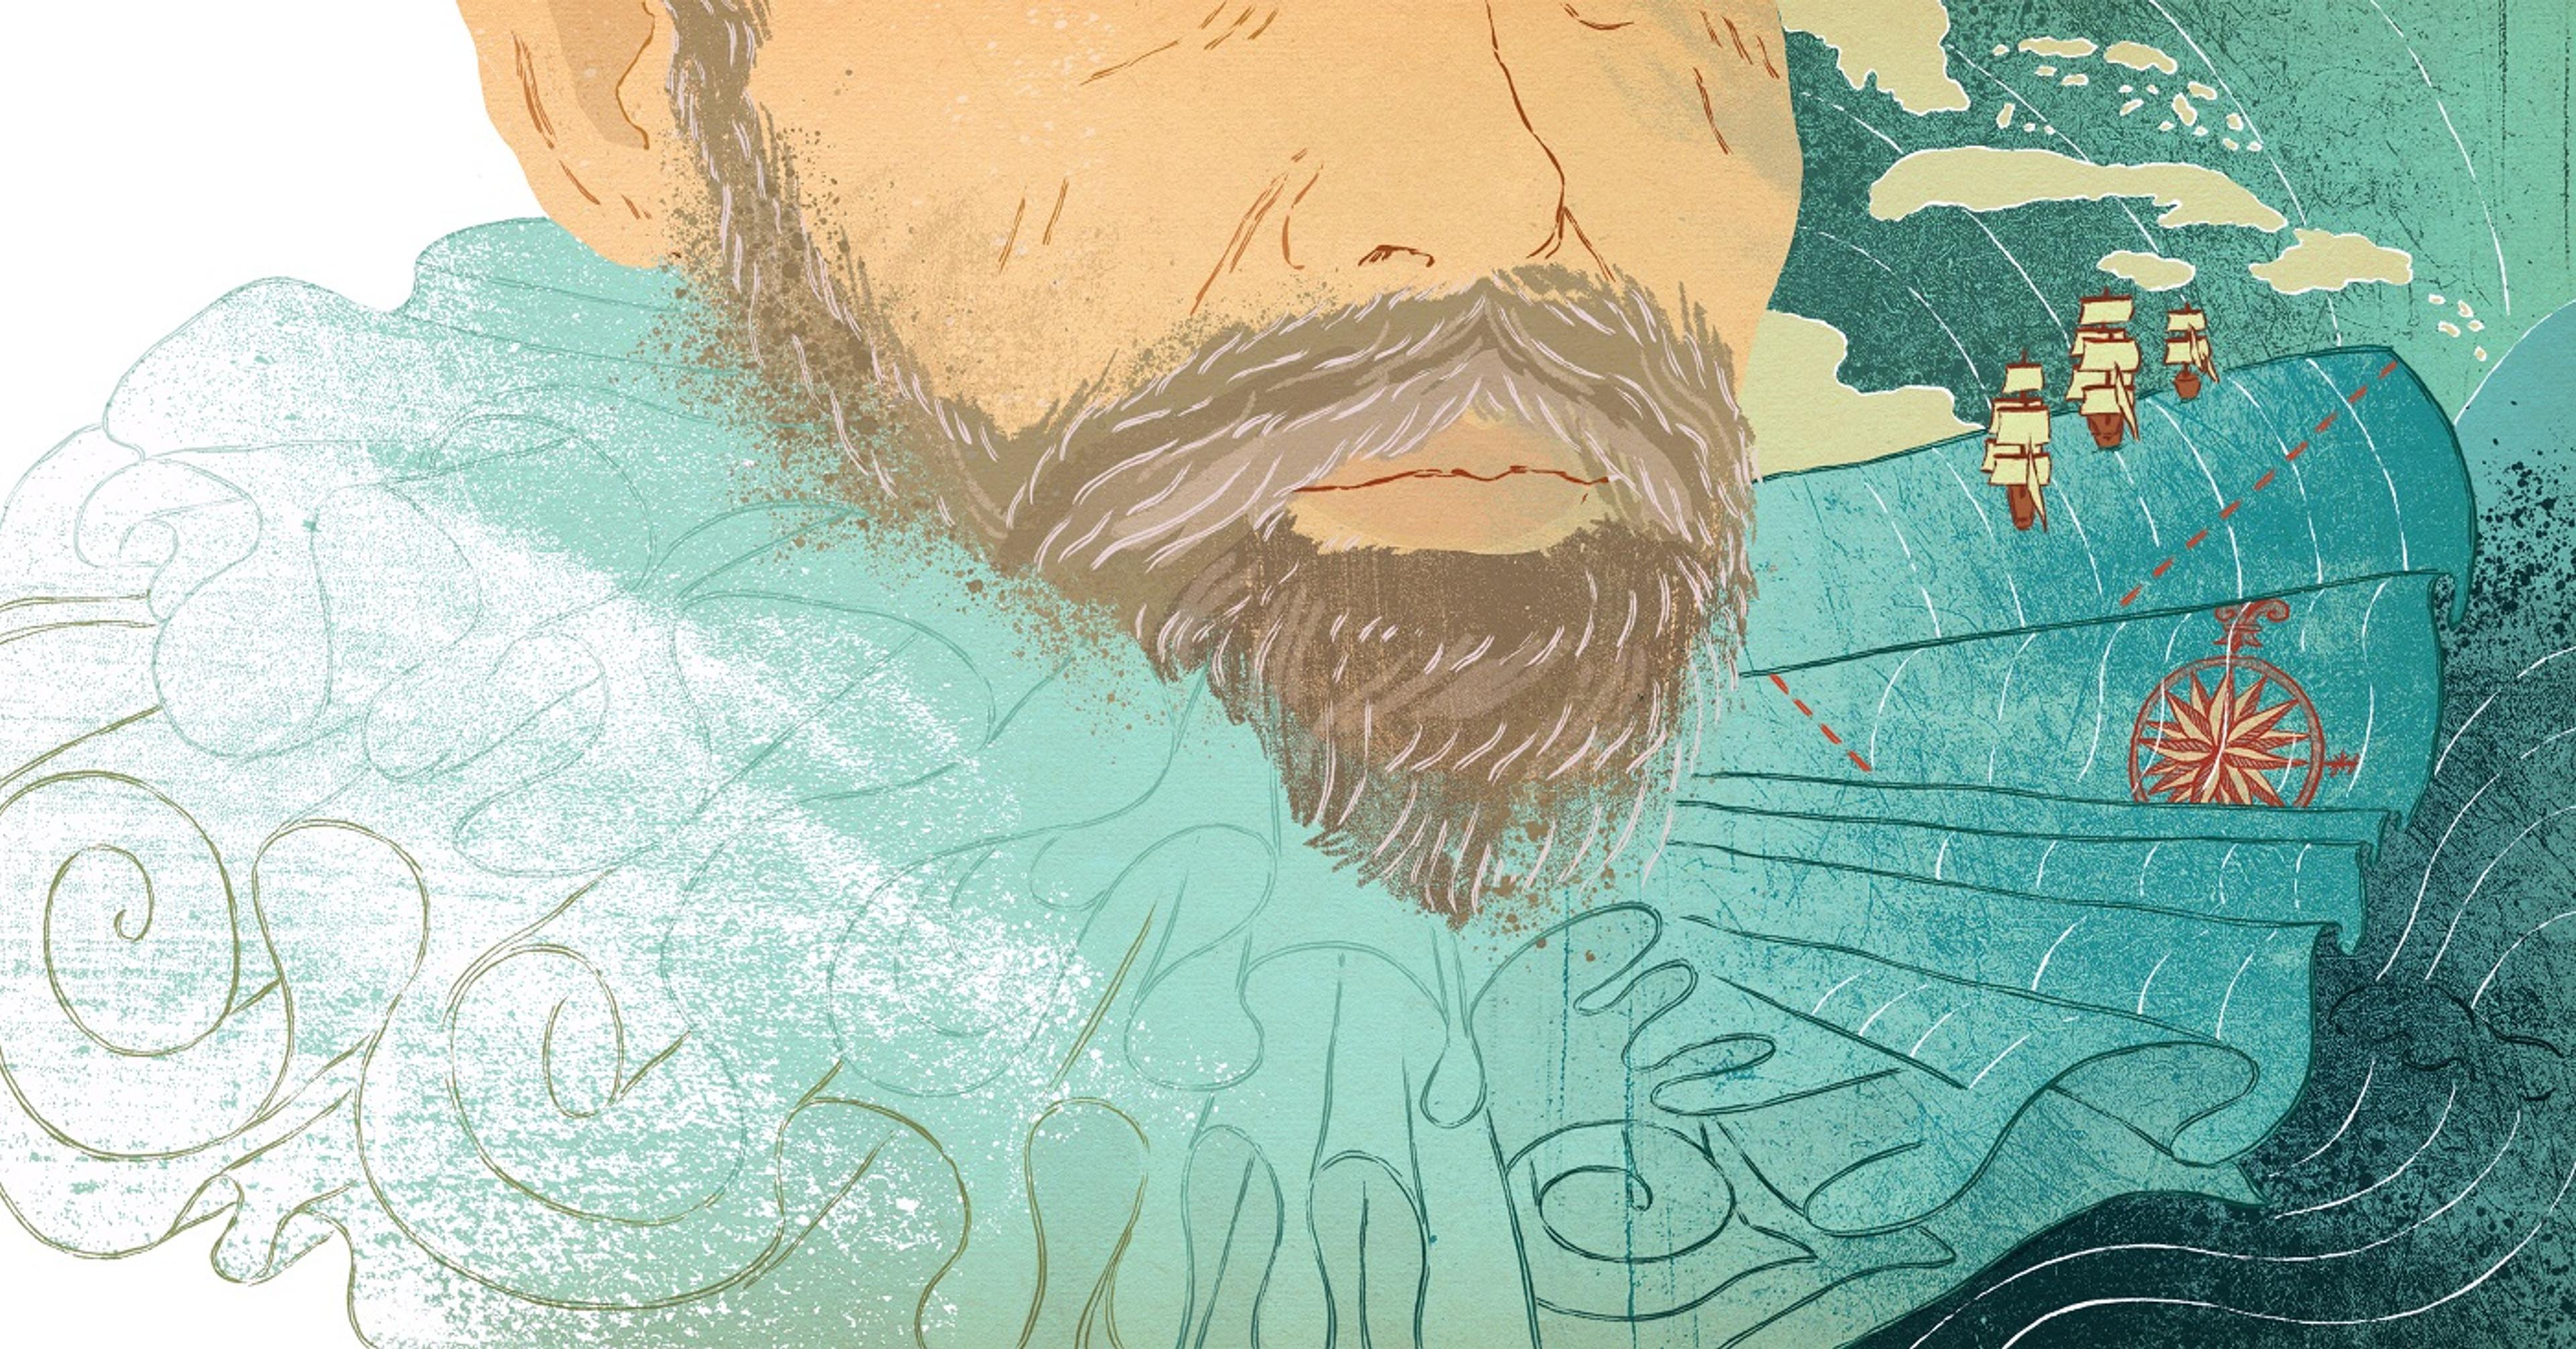 Illustration of a bearded man wearing a ruff with the ruffs on one side transforming into a seascape and map with three small ships heading in the direction of some islands in the distance